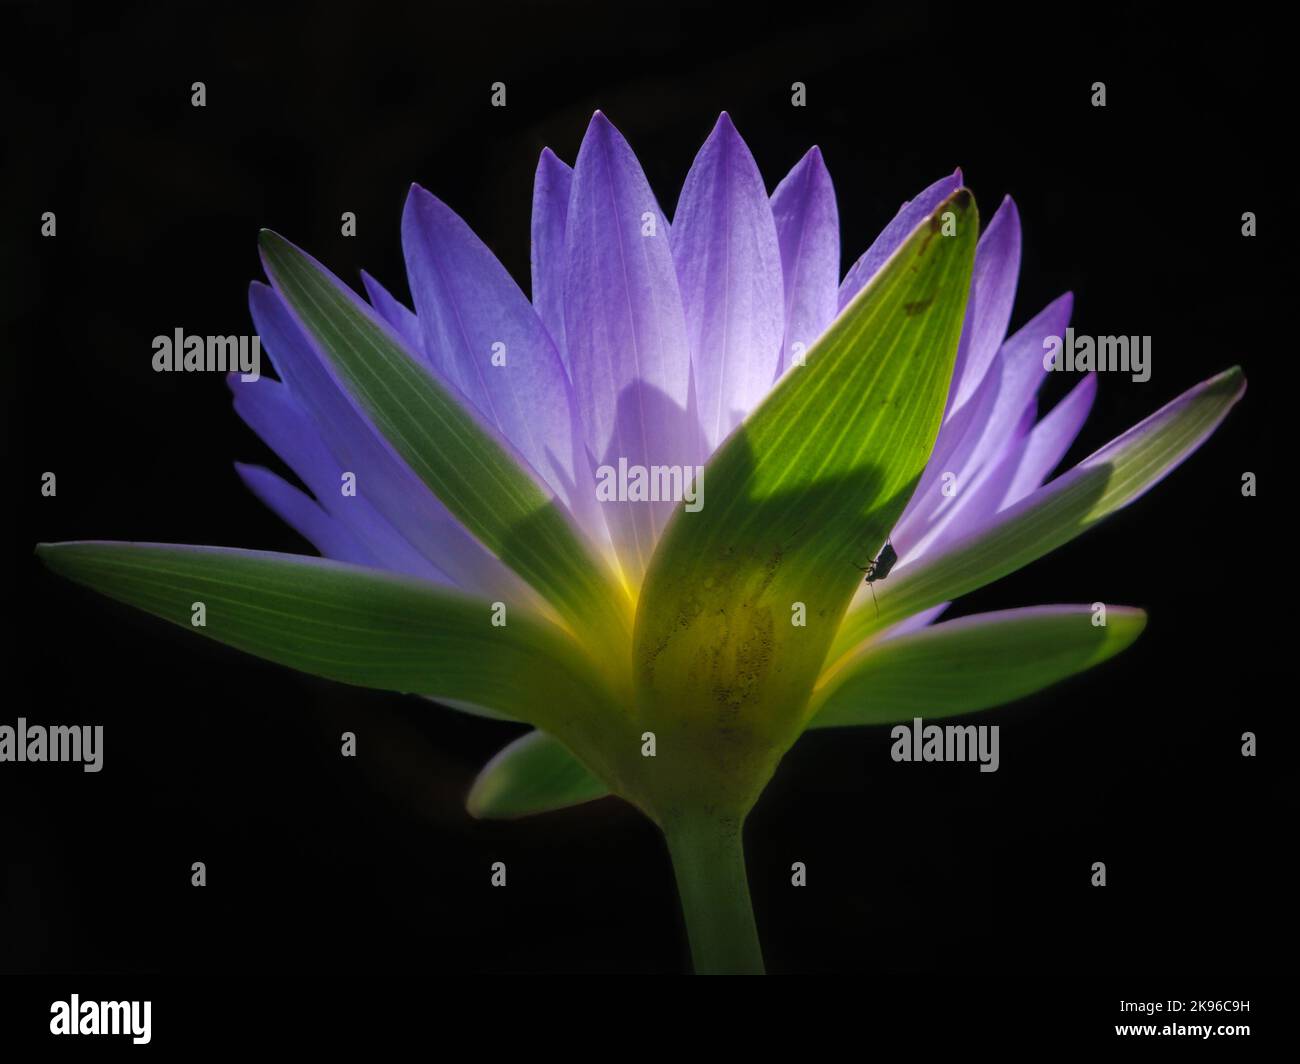 Closeup view of purple blue tropical water lily backlit flower blooming on black background Stock Photo